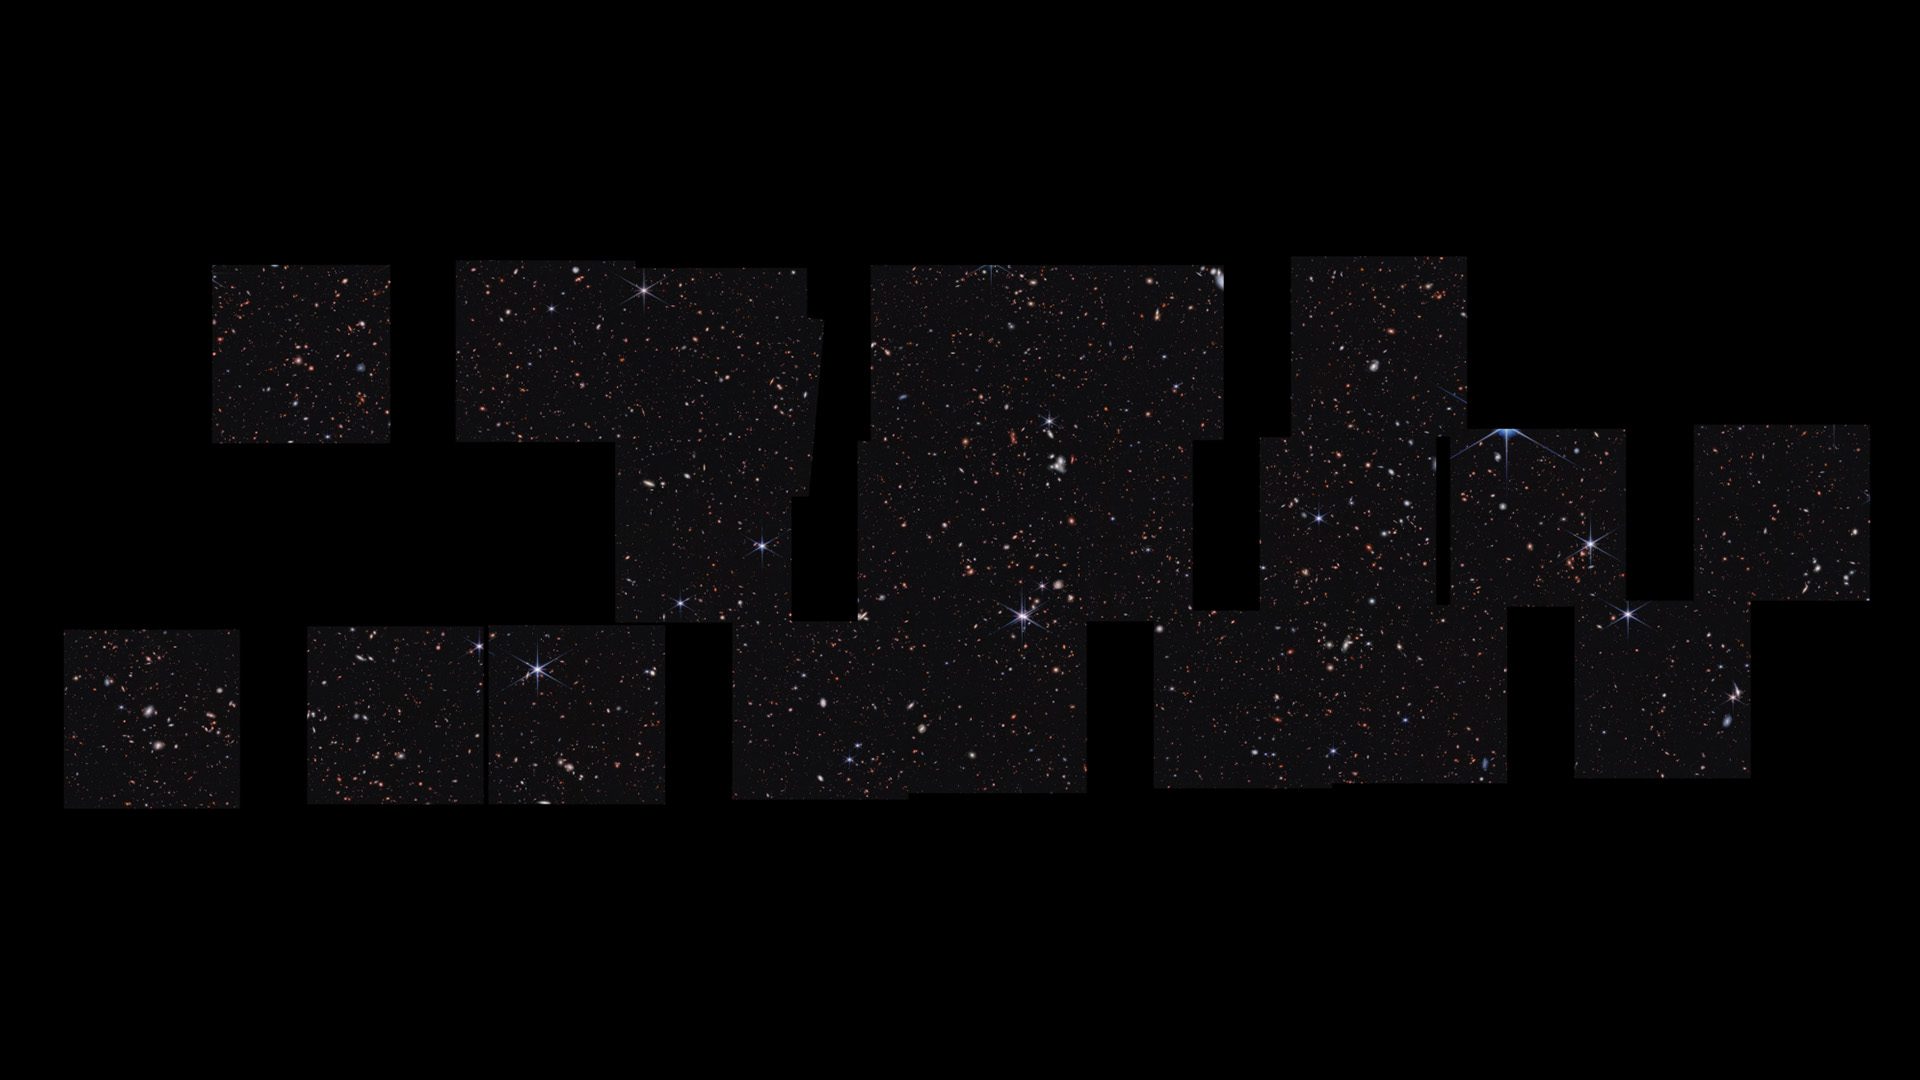 A panoramic vista of over 100,000 galaxies. This picture was stitched together from multiple images captured by the James Webb Space Telescope in near-infrared light